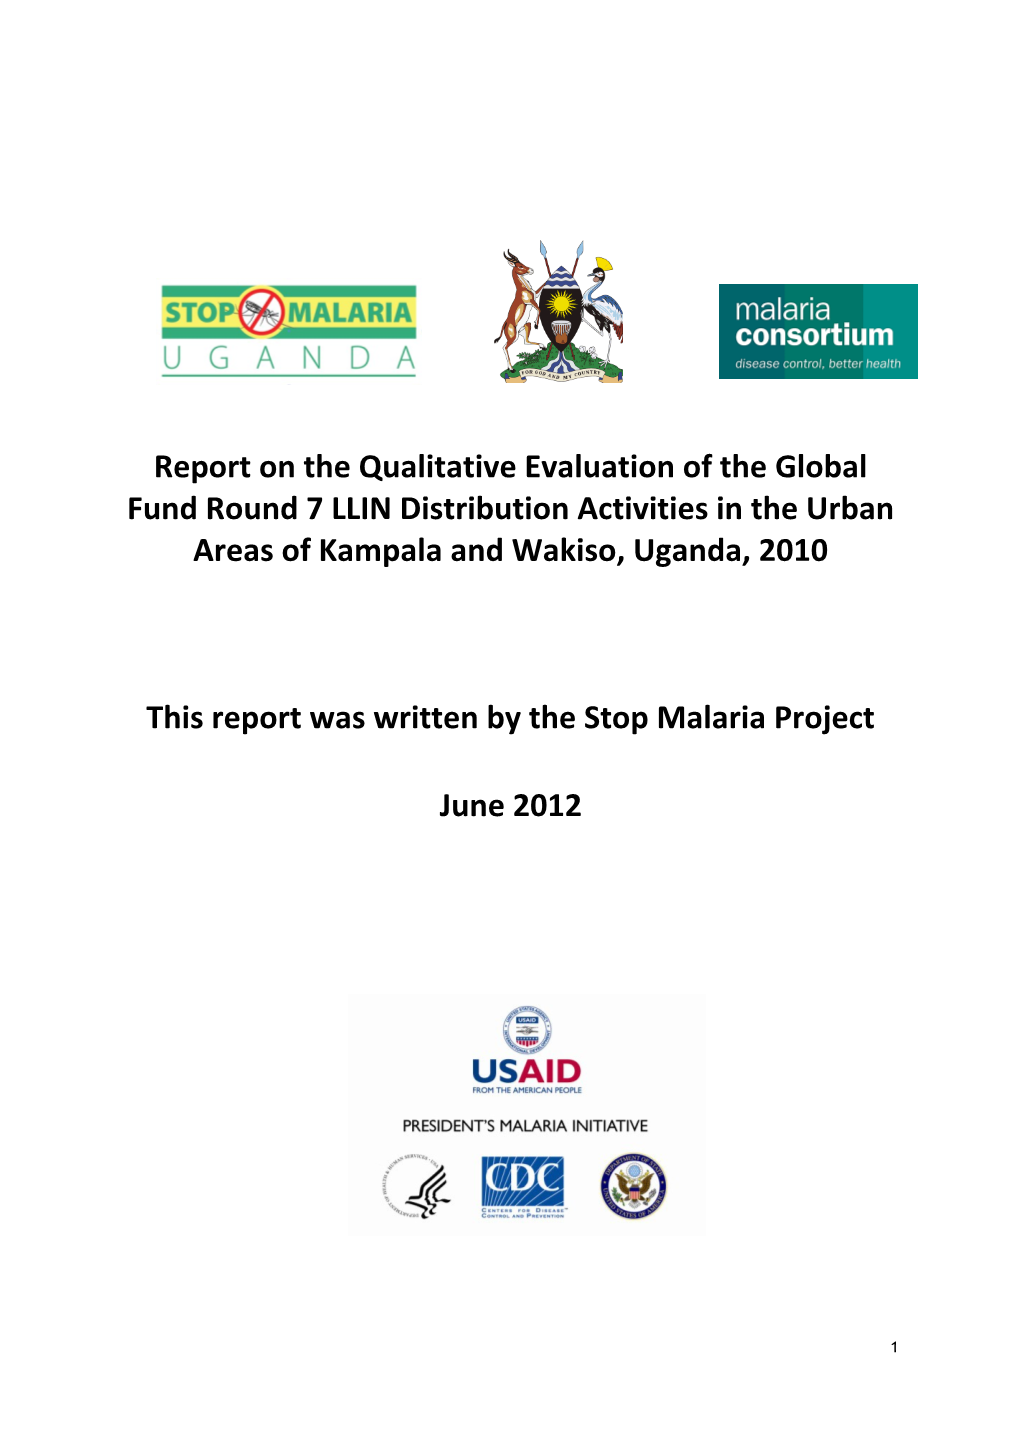 This Report Was Written by the Stop Malaria Project